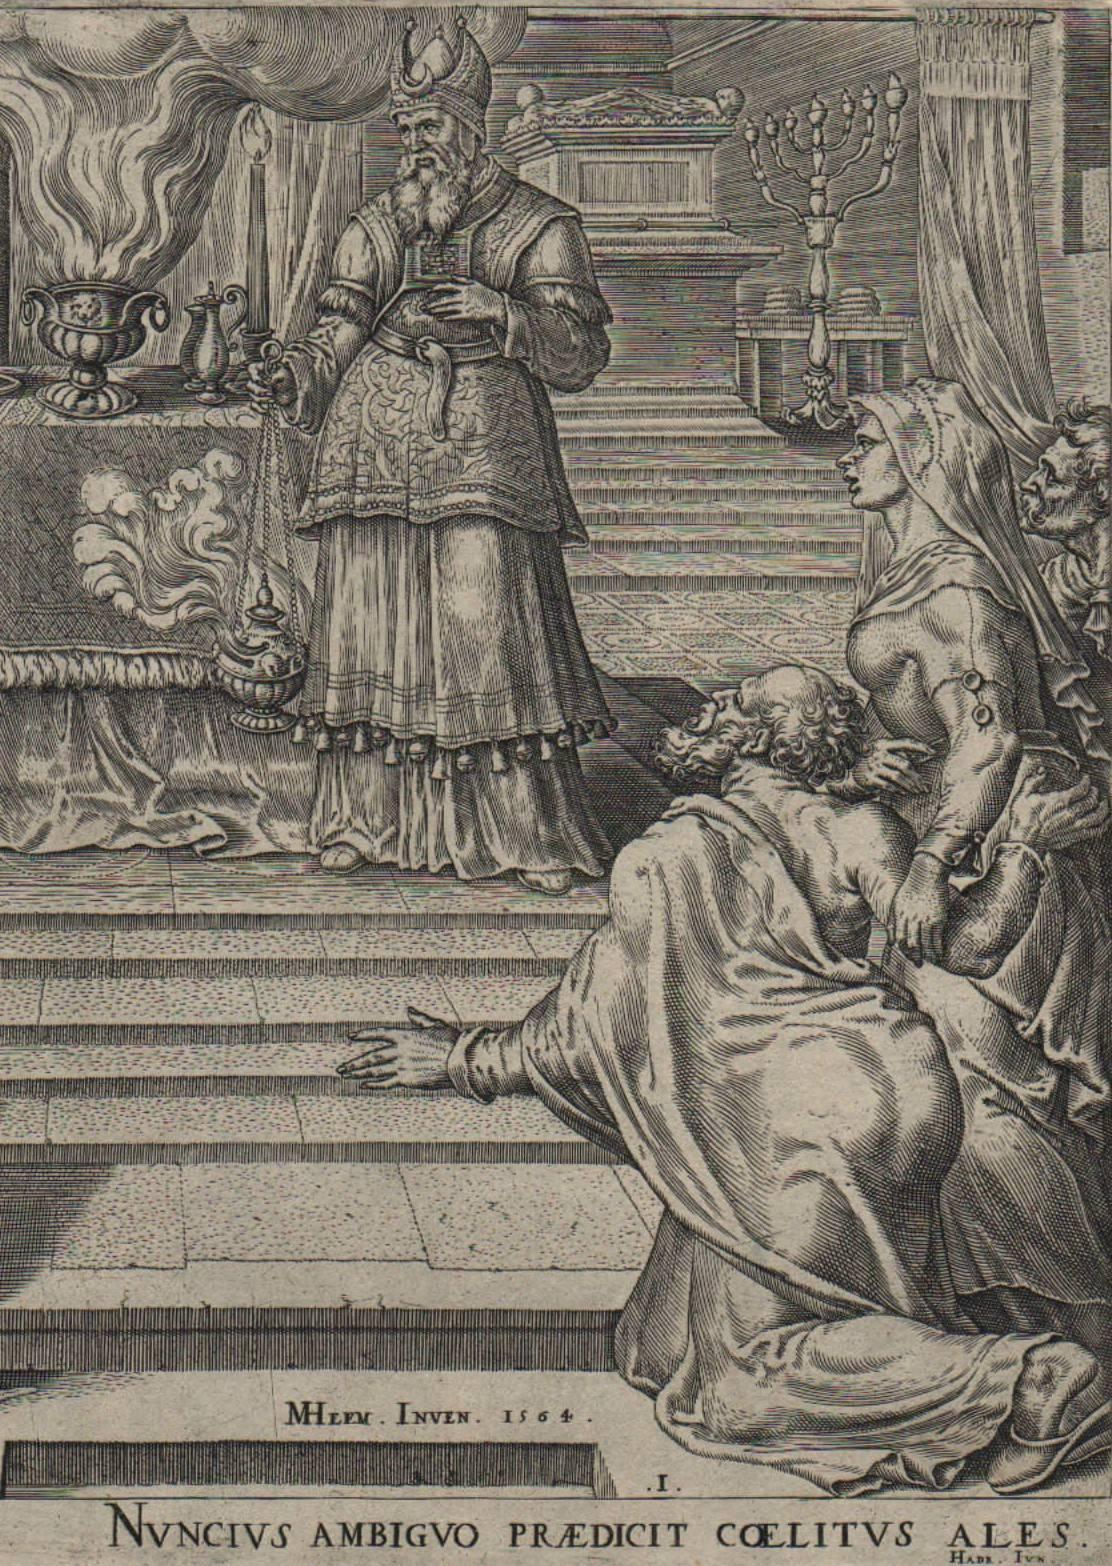 Zecharias Preaching in the Temple - 1564 Old Master Engraving Religious - Northern Renaissance Print by Philips Galle